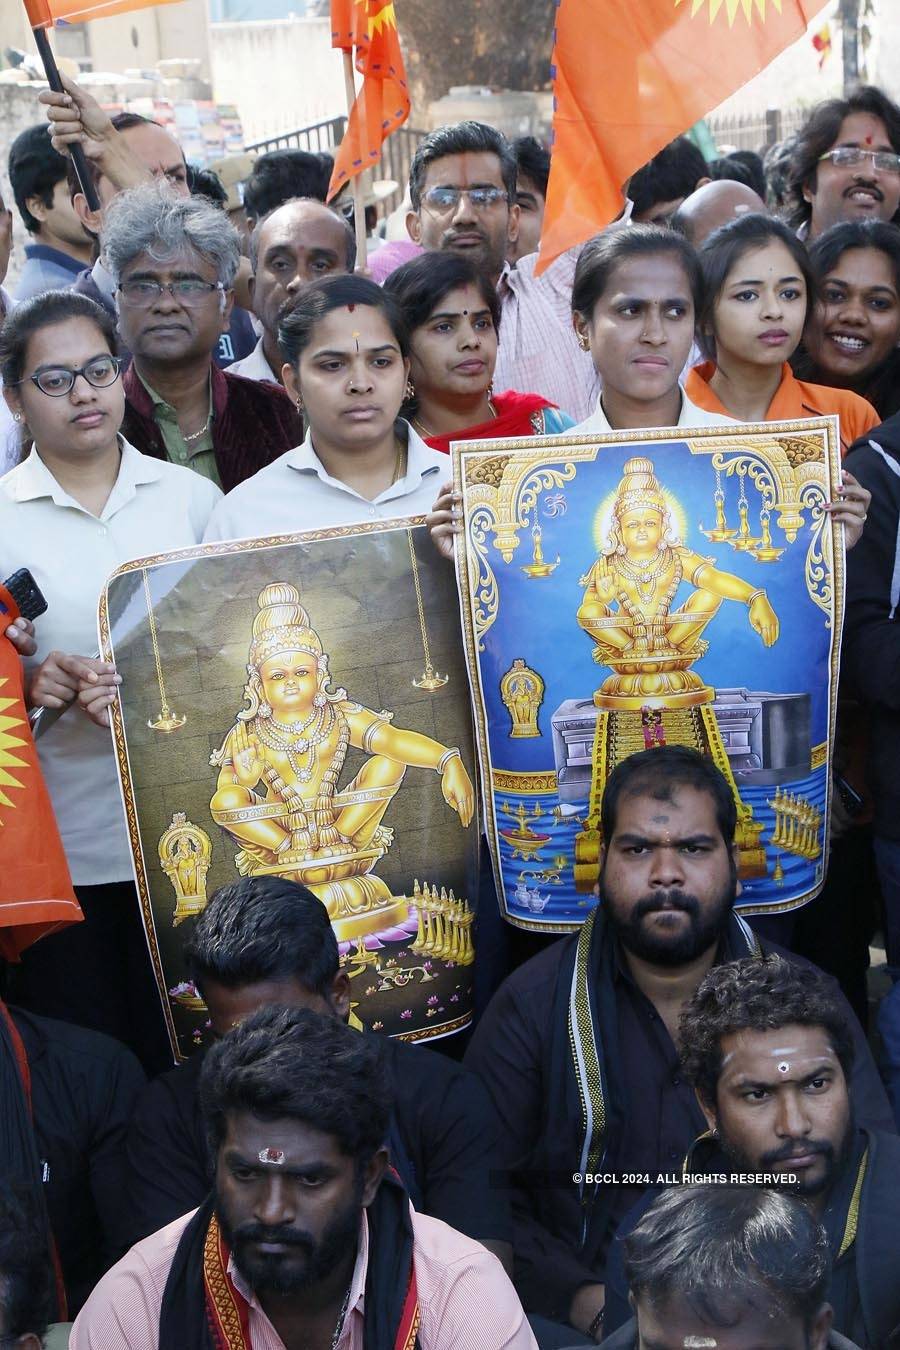 Protests, clashes in Kerala after women's entry into Sabarimala